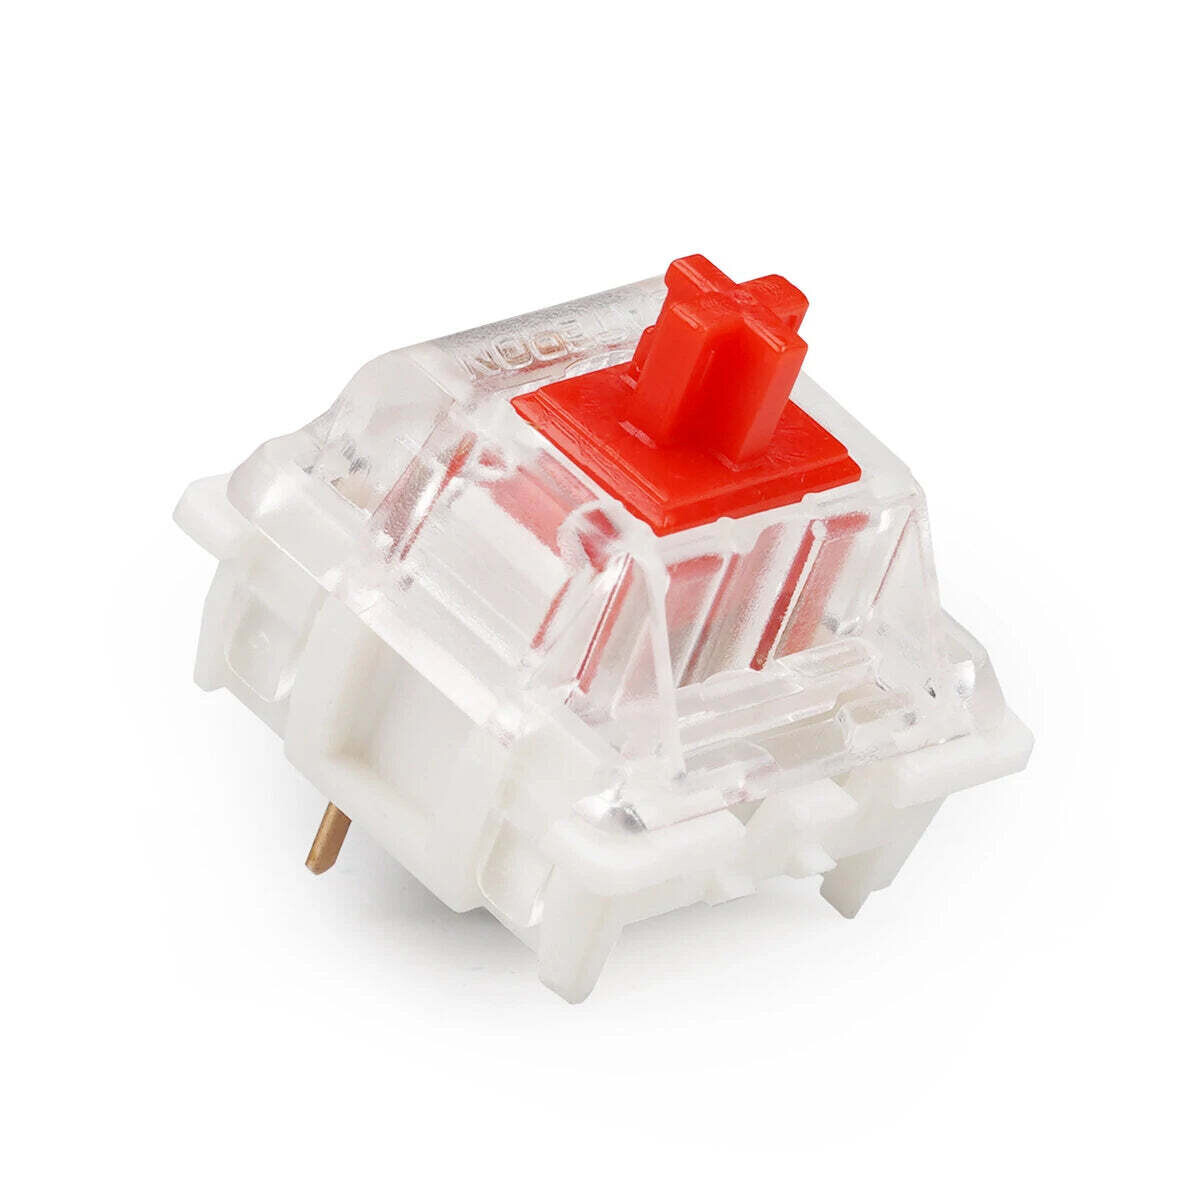 YamPAD Key Switch Pack Gateron Silent Red (PCB Mount)